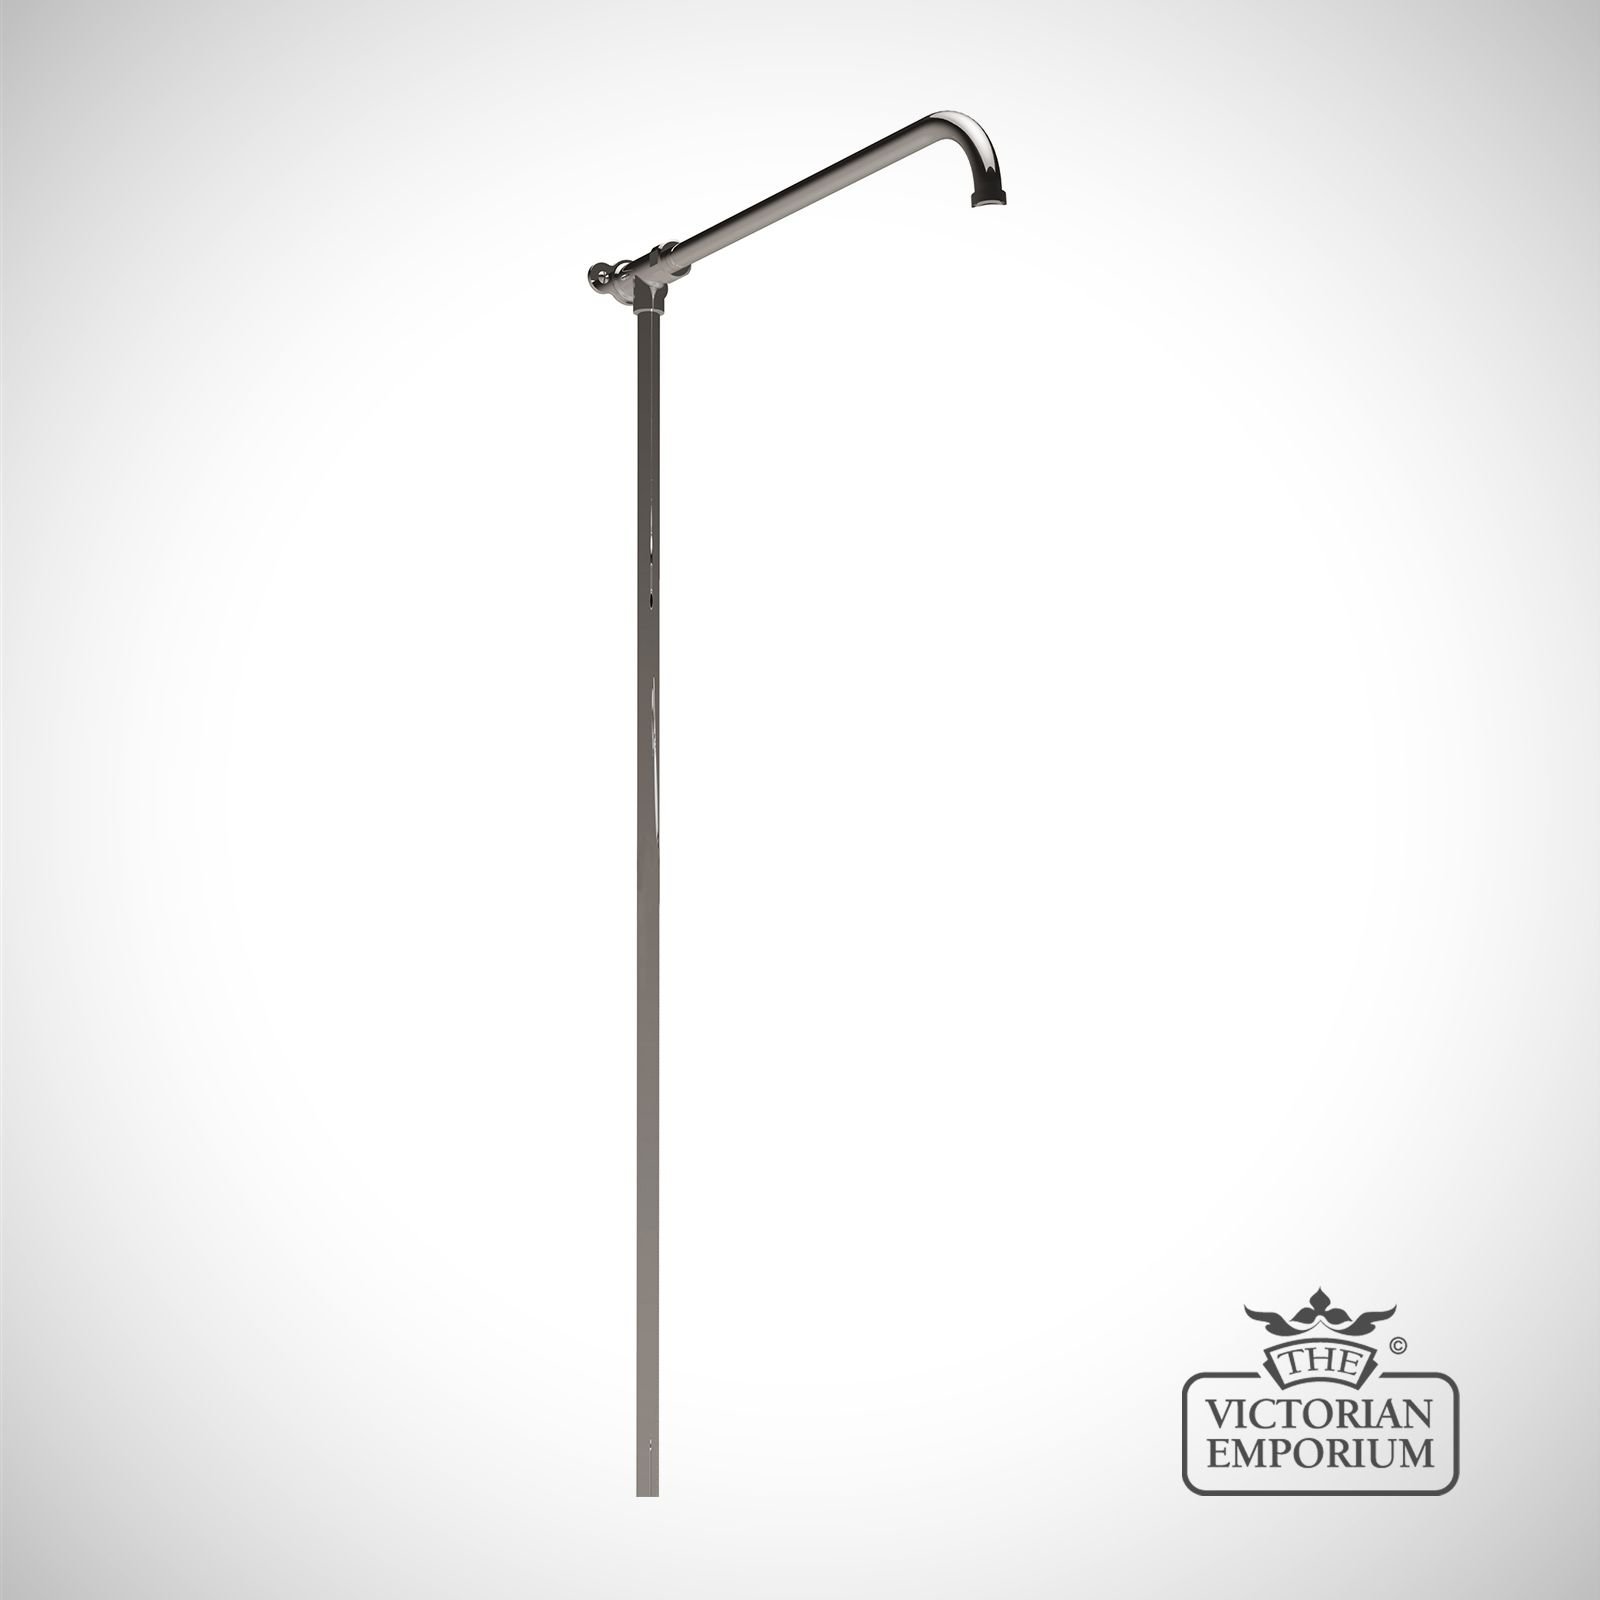 Chrome Shower Arm With Riser Rail - in Chrome, Nickel or Copper